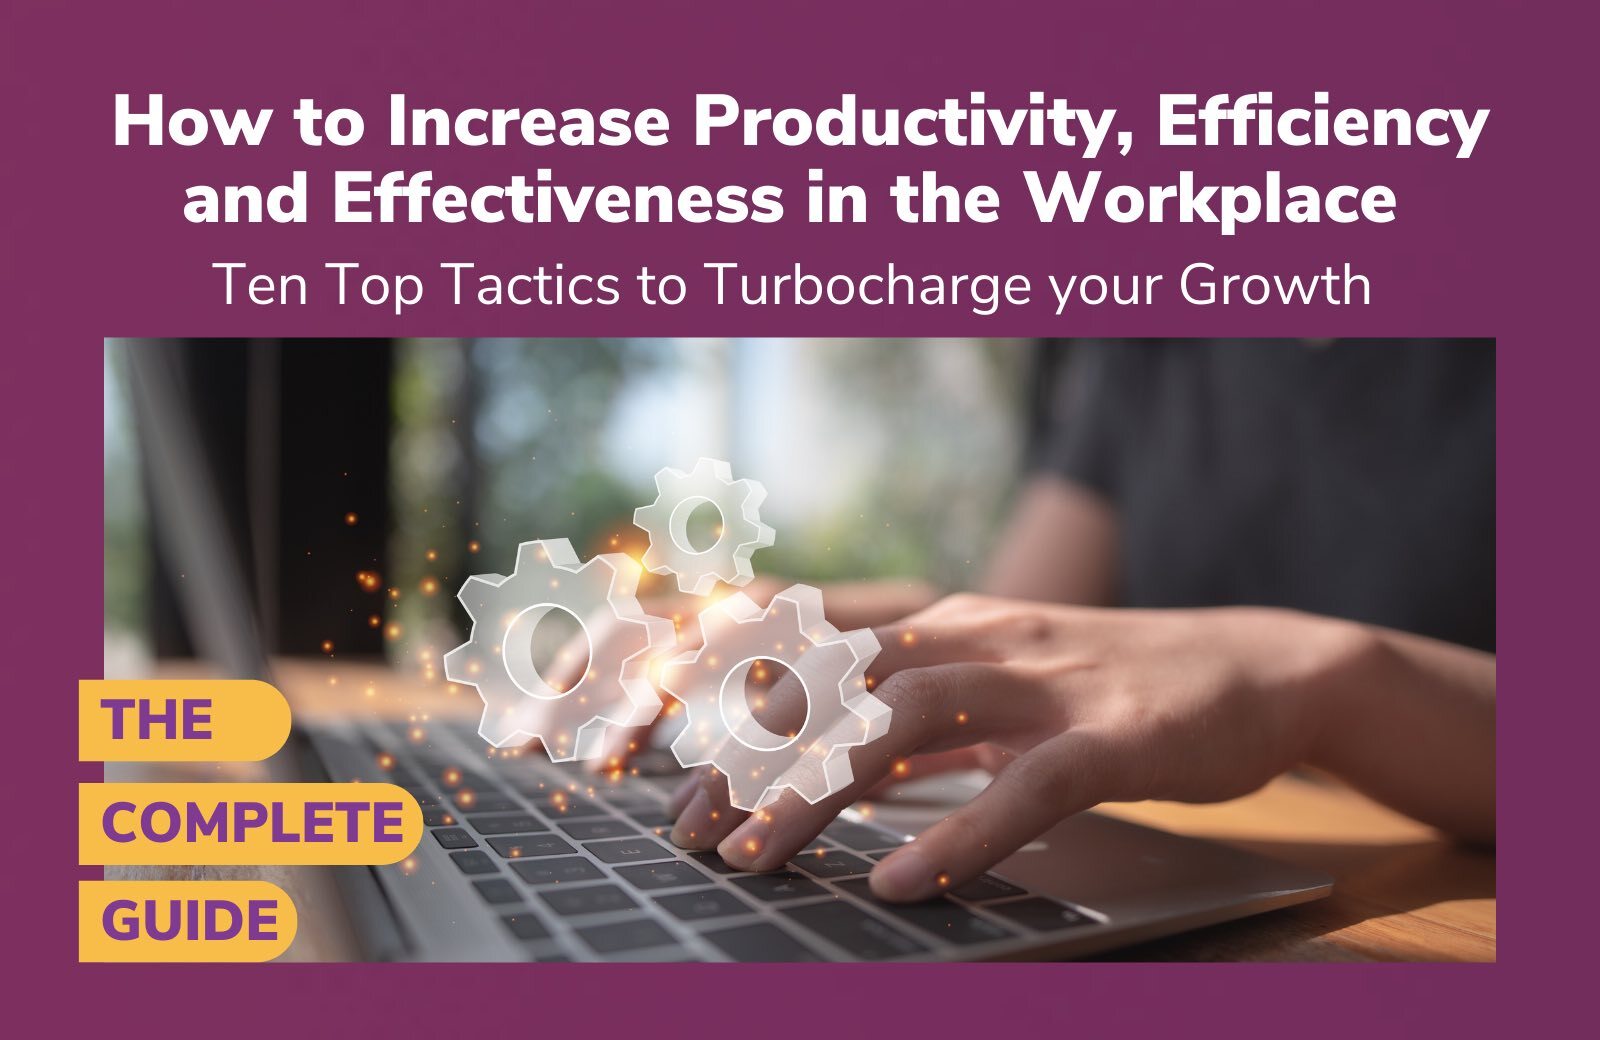 How to Increase Productivity, Efficiency, and Effectiveness in the Workplace: Ten Top Tactics to Turbocharge your Growth